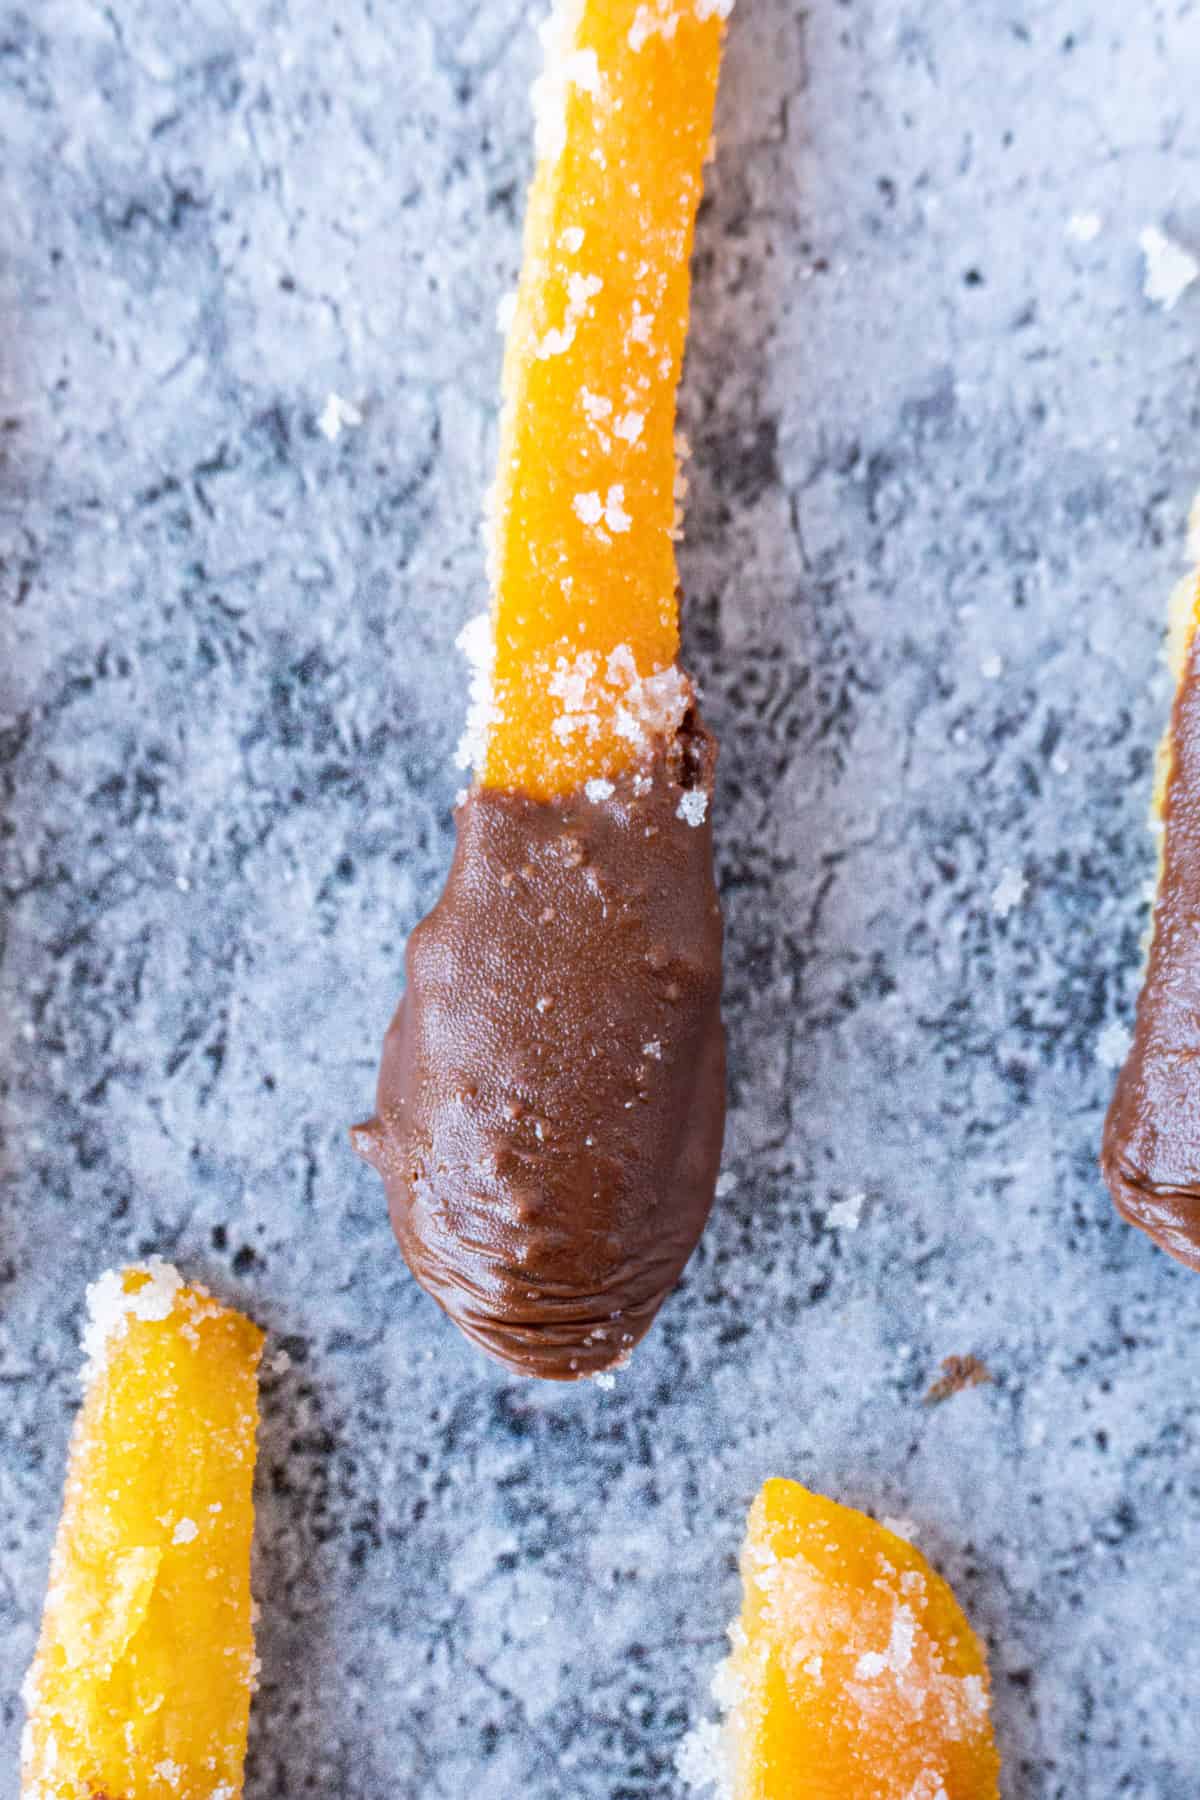 candied orange peel dipped in chocolate